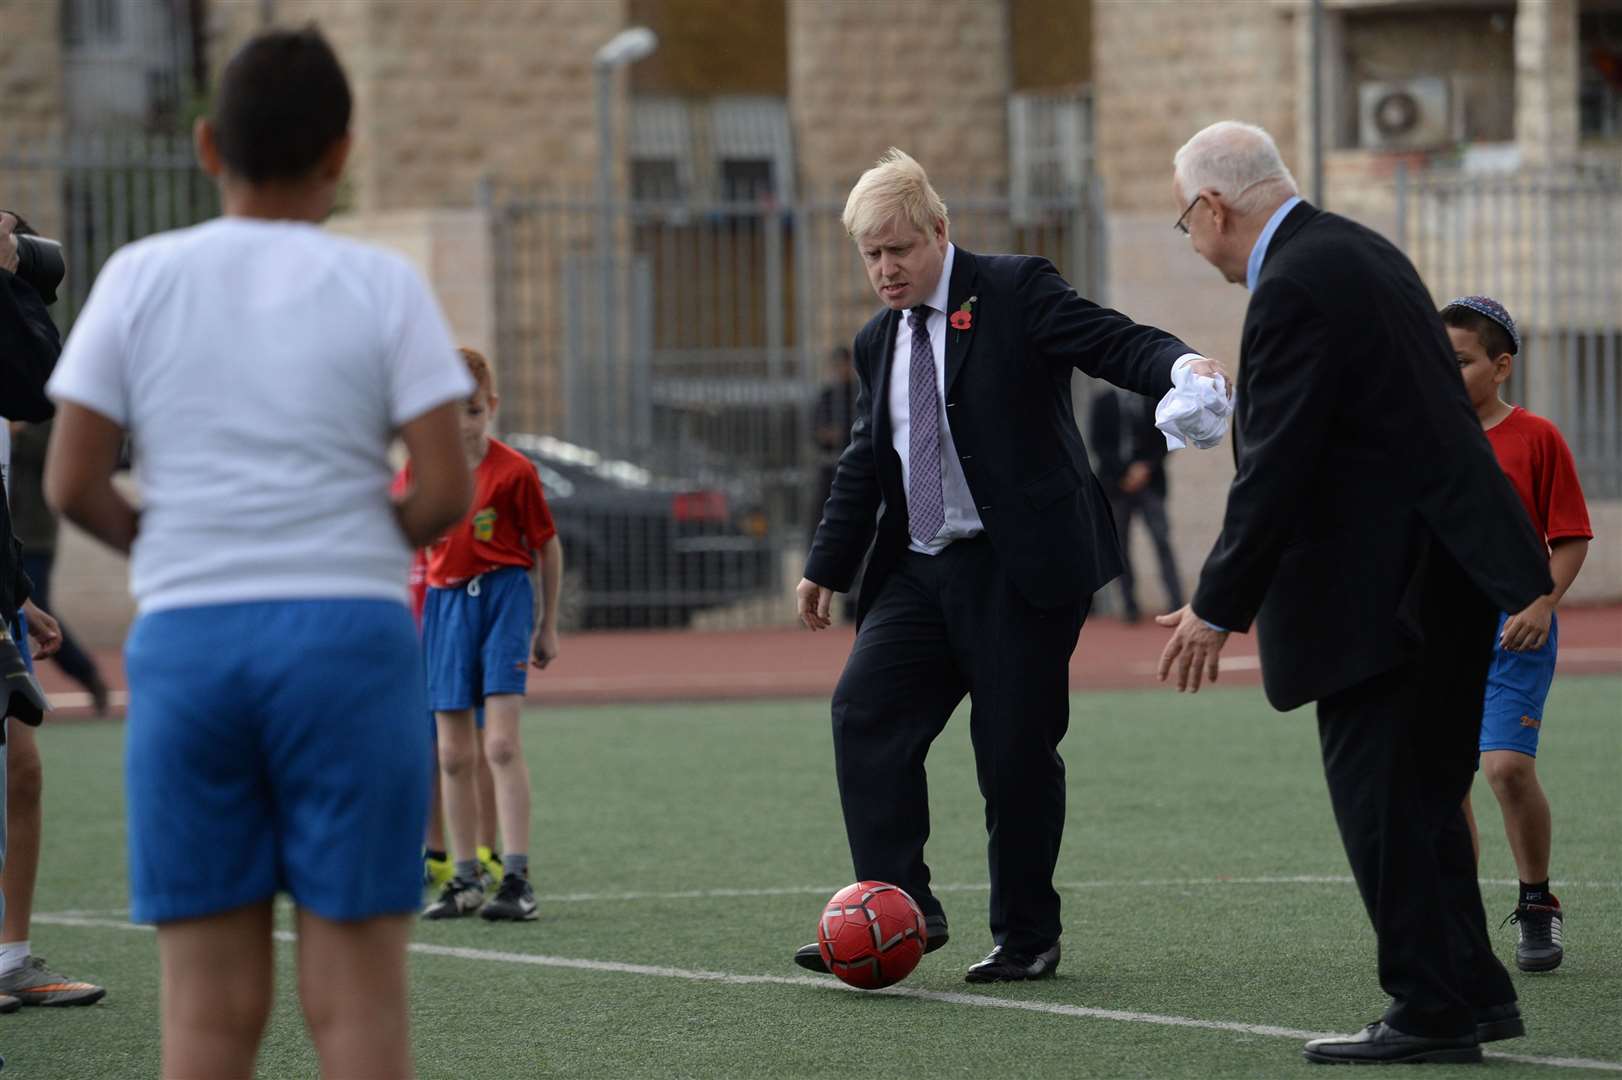 Even international opponents hold no fear for the PM, here Mr Johnson has a kick-about with Israeli president Reuven Rivlin in Jerusalem in 2015 (Stefan Rousseau/PA)